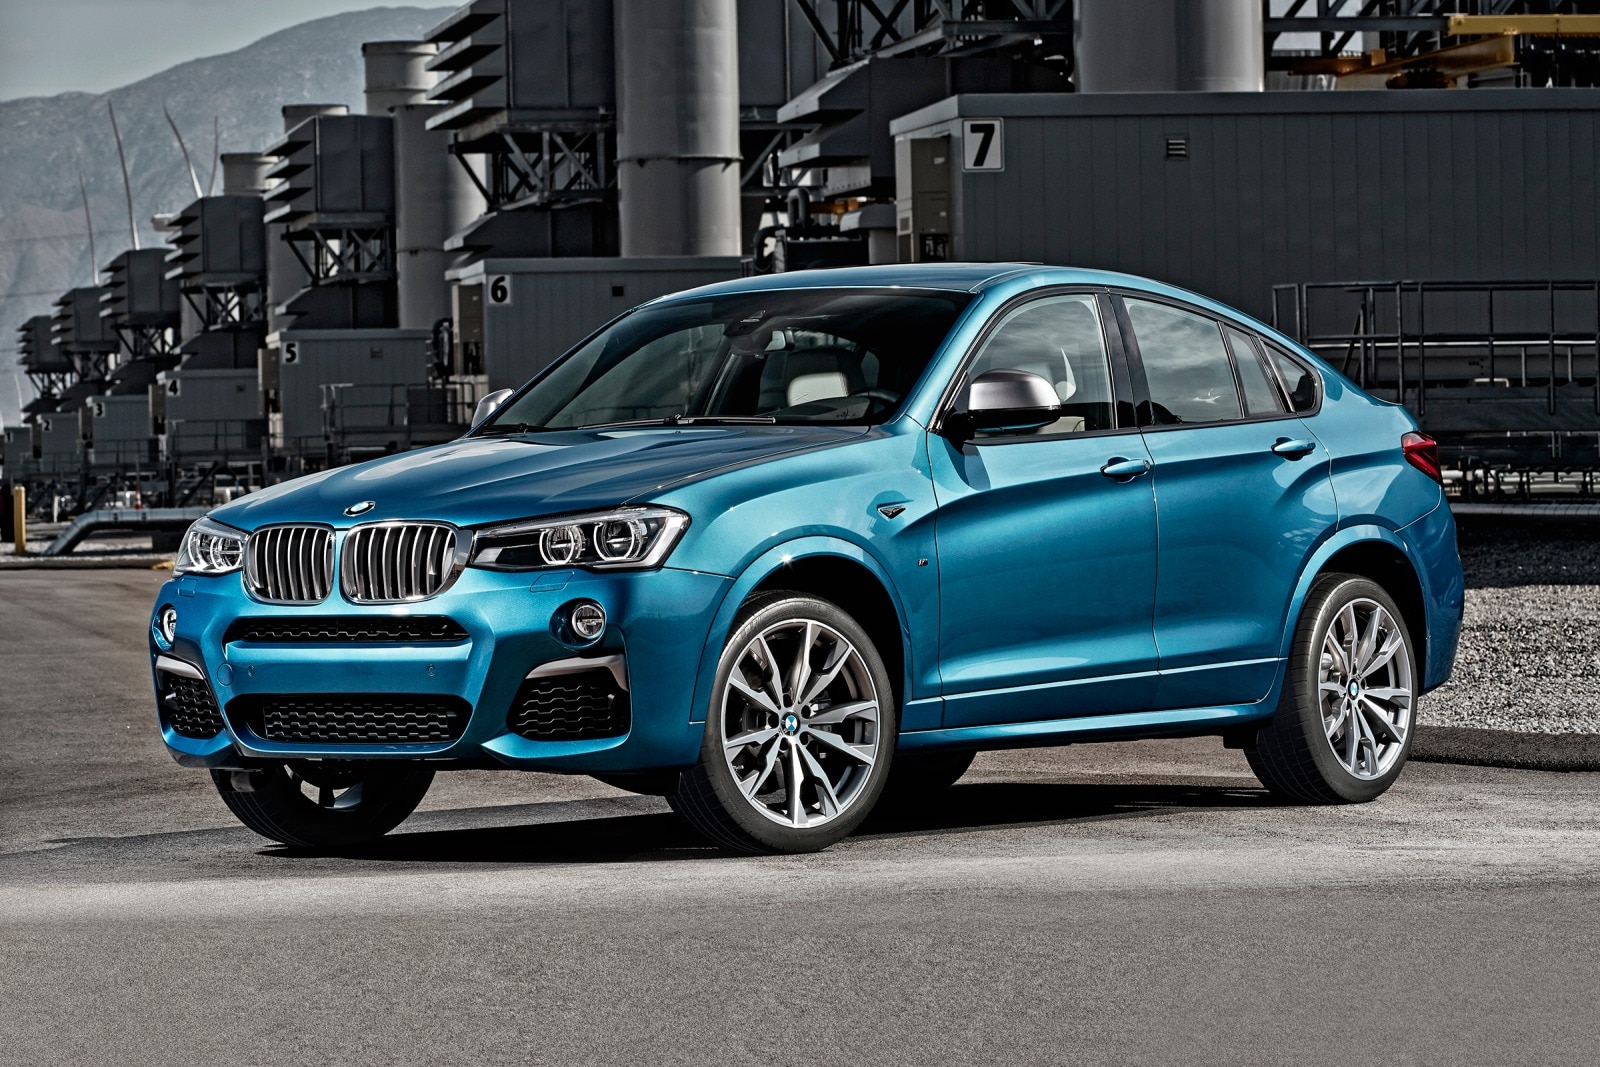 Used 2018 BMW X4 M40i Review | Edmunds